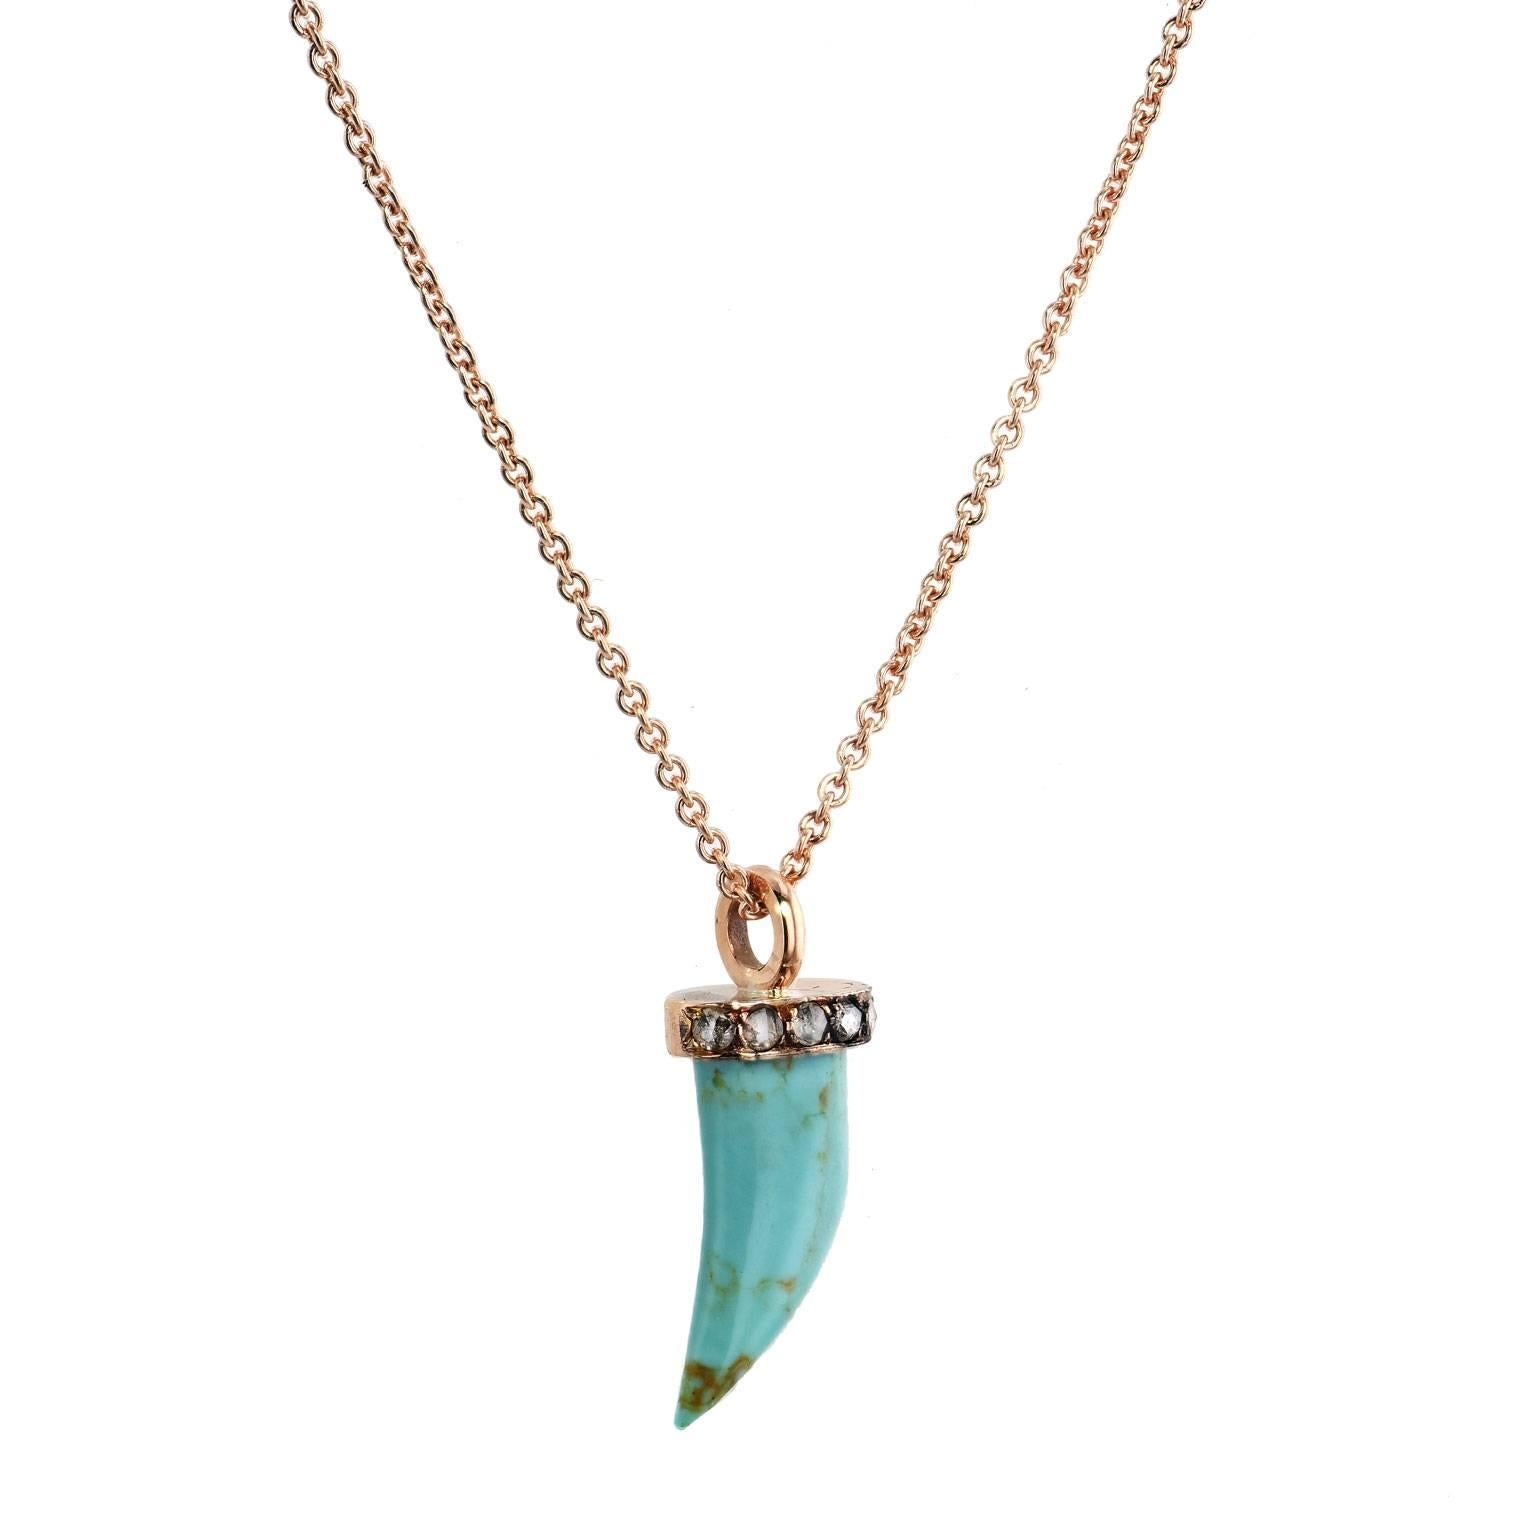 Turquoise Horn with 0.10 Carat Diamond Pave 18 karat Rose Gold Pendant Necklace

This turquoise horn is a one of a kind creation by H&H Jewels.  It hangs elegantly in this handcrafted 18 karat rose gold and 0.10 carat rose cut pave-set diamond